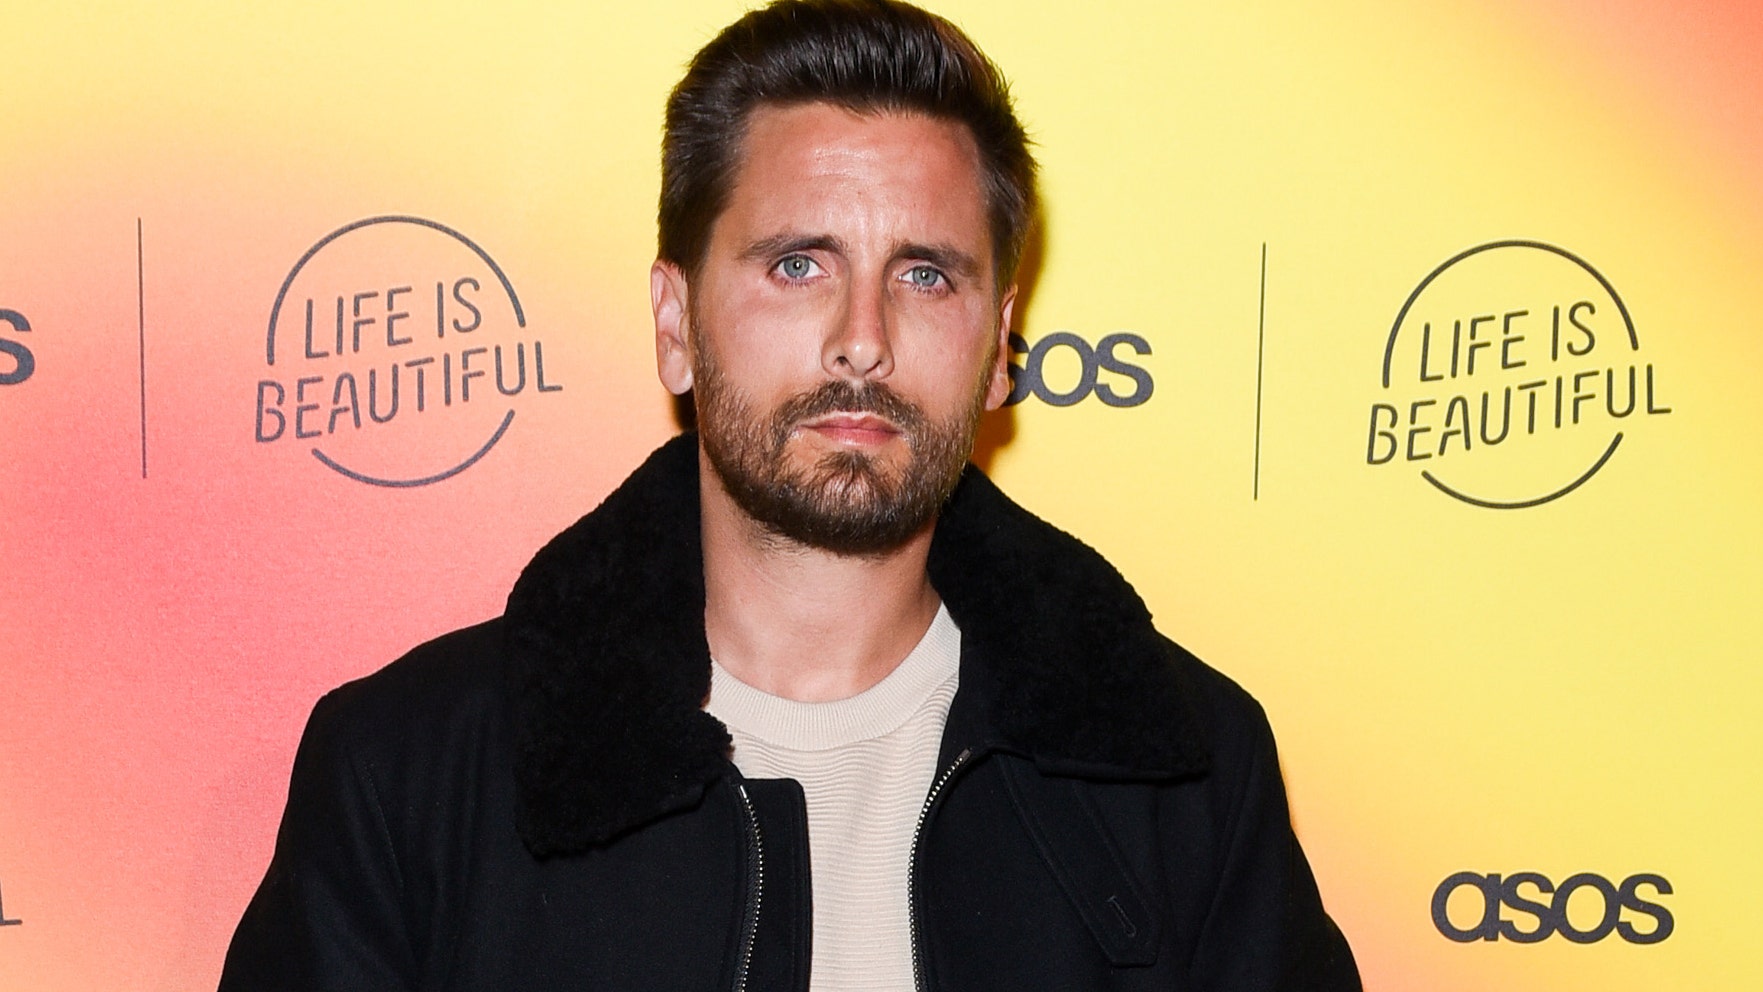 Scott Disick explains why he dates much younger women on 'KUWTK' reunion